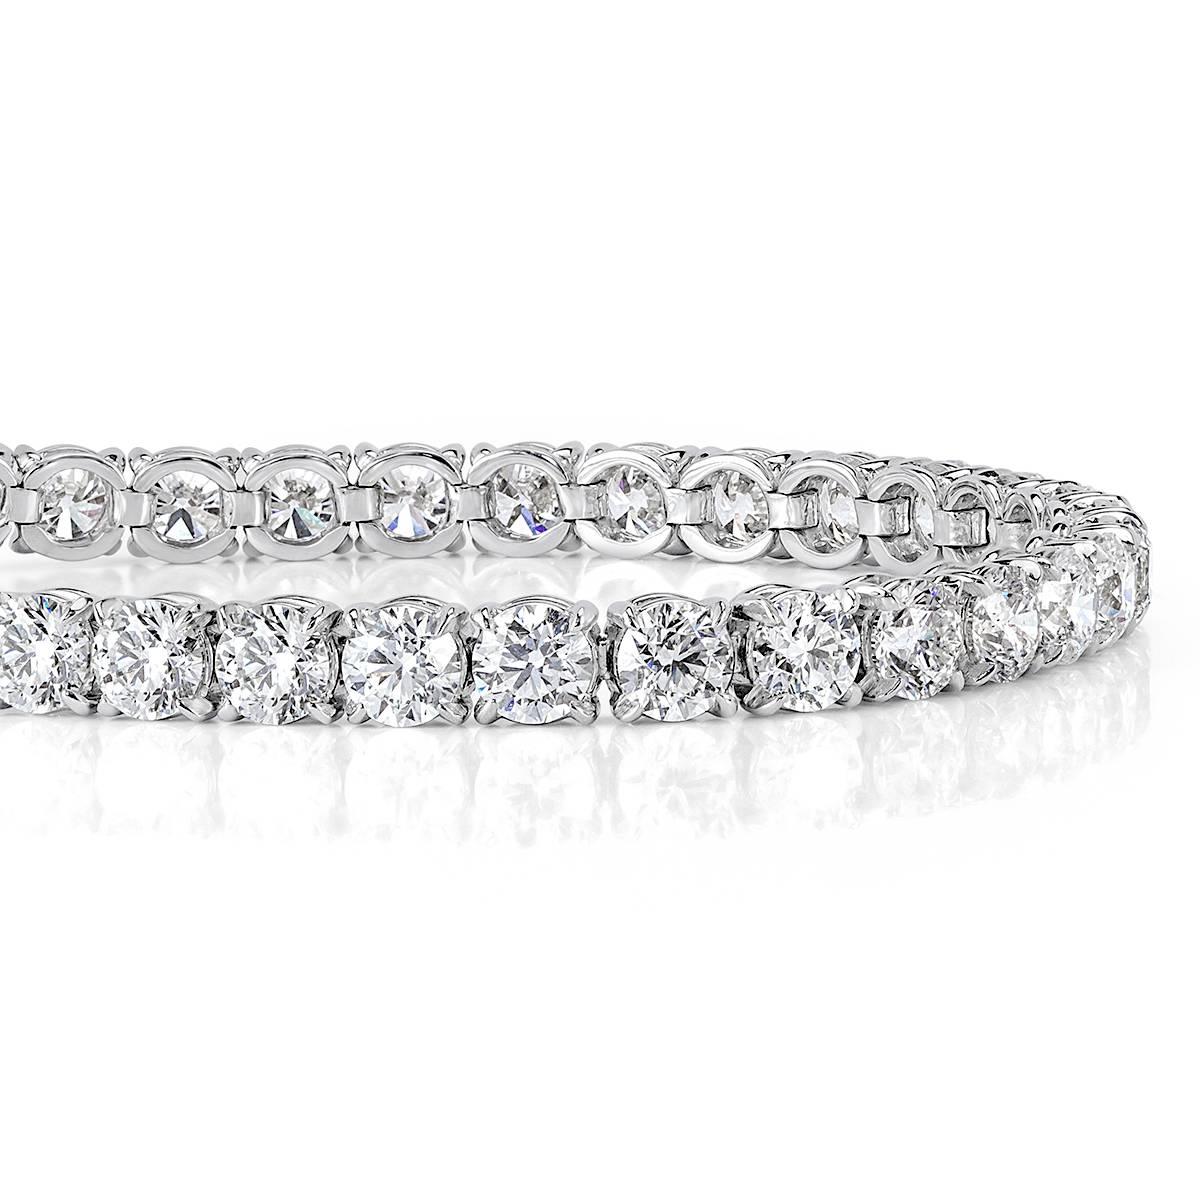 Enjoy timeless elegance with this gorgeous diamond tennis bracelet featuring a whopping 16.02ct of sparkling round brilliant cut diamonds graded at G-H SI1-SI2. It is expertly crafted in high polish, 18k white gold.